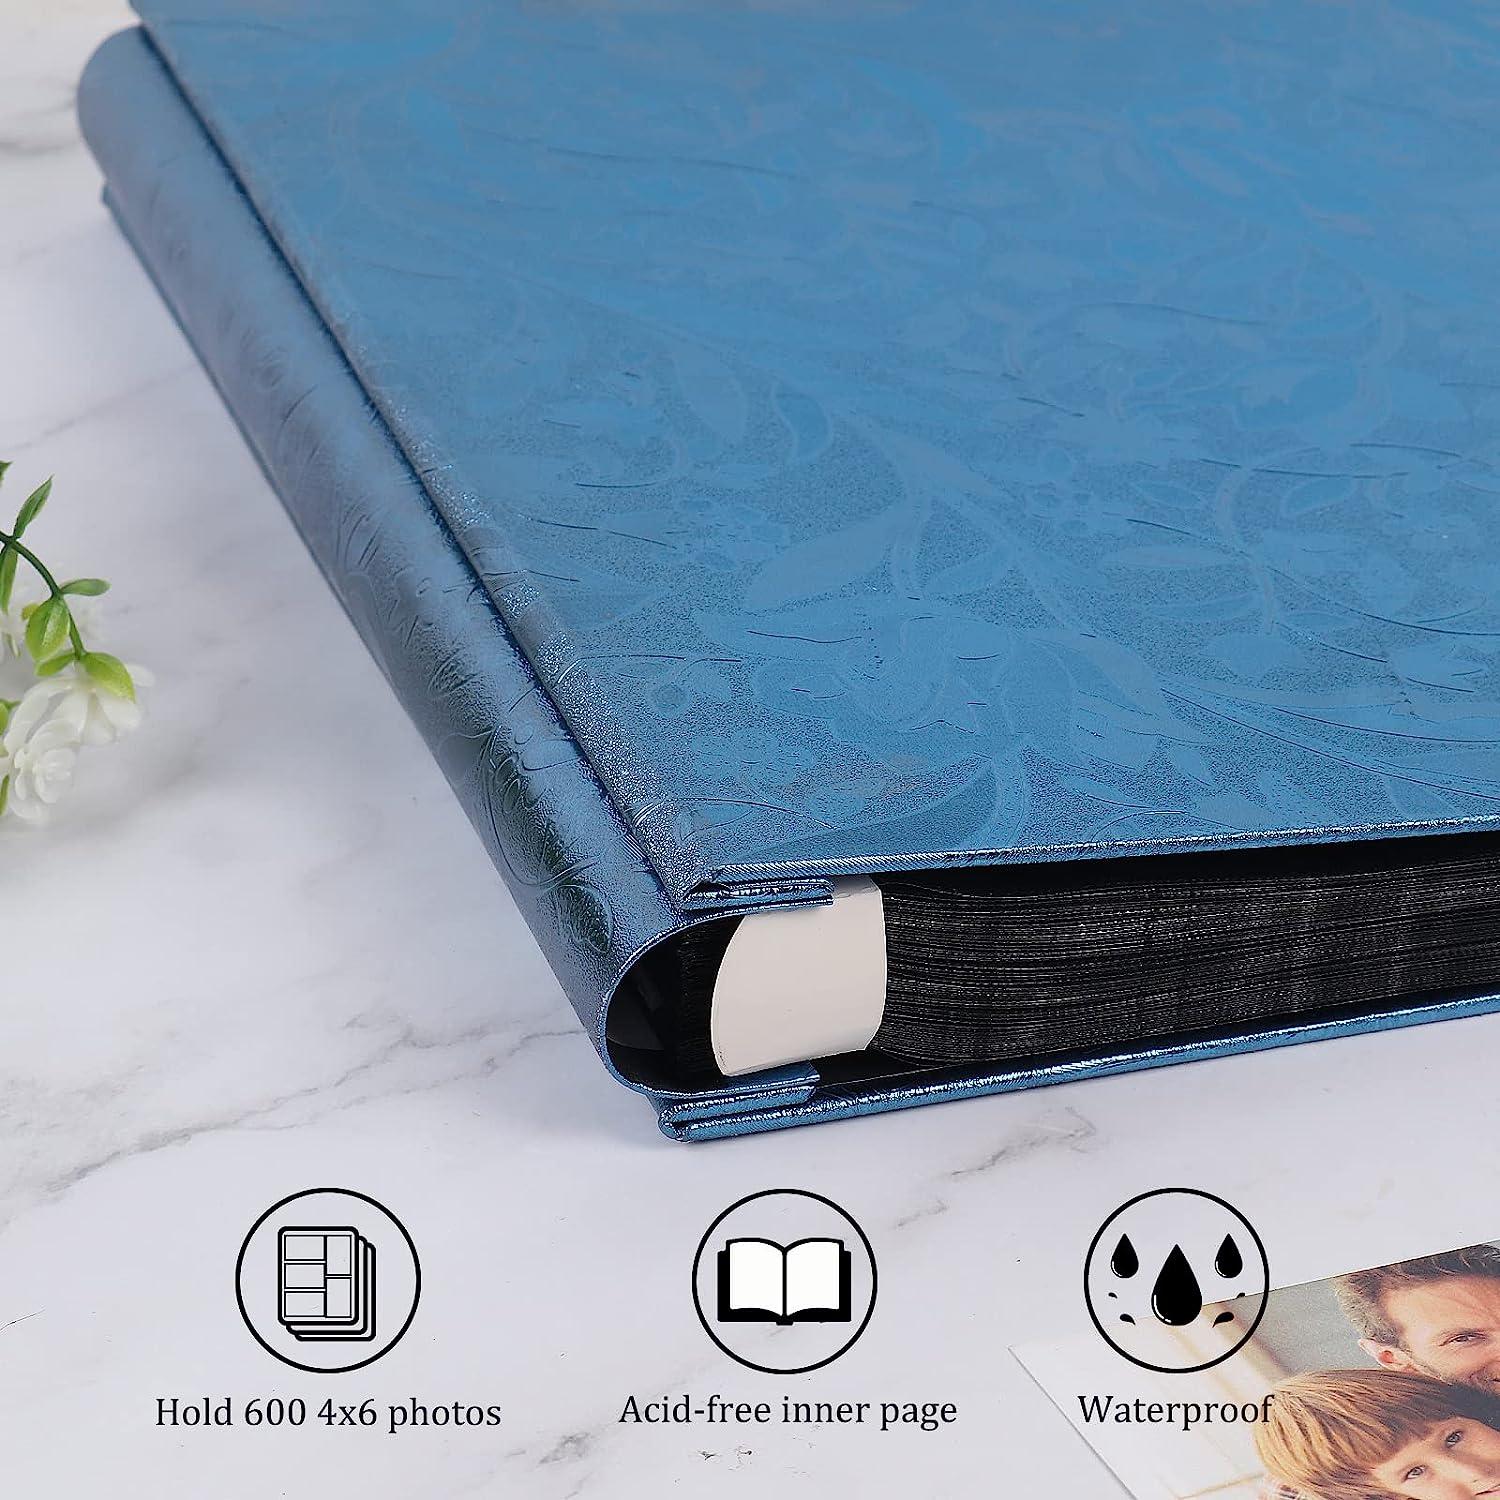 RECUTMS Photo Album 4x6 600 Photos Black Pages Large Capacity Leather Cover  Family Photo Albums Holds 600 Horizontal and Vertical Photos (Black)